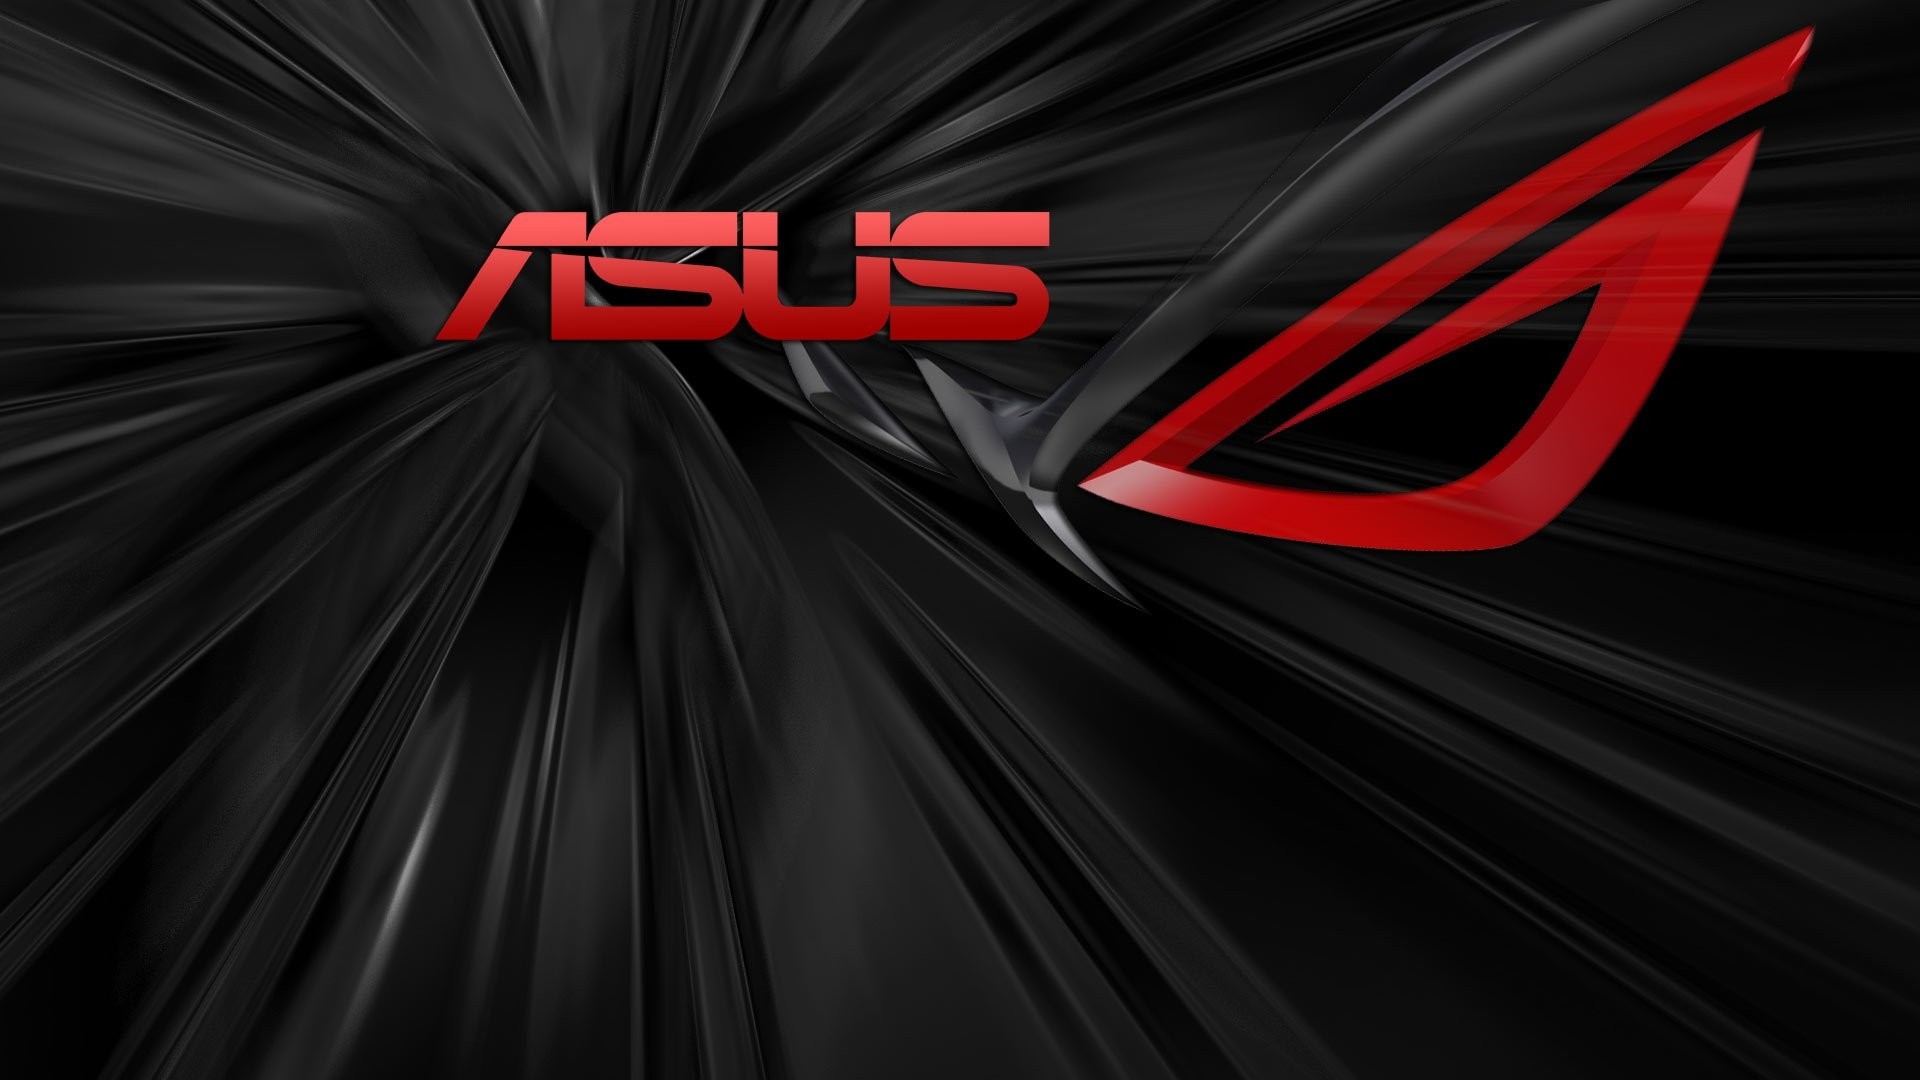 Asus Wallpaper for pc